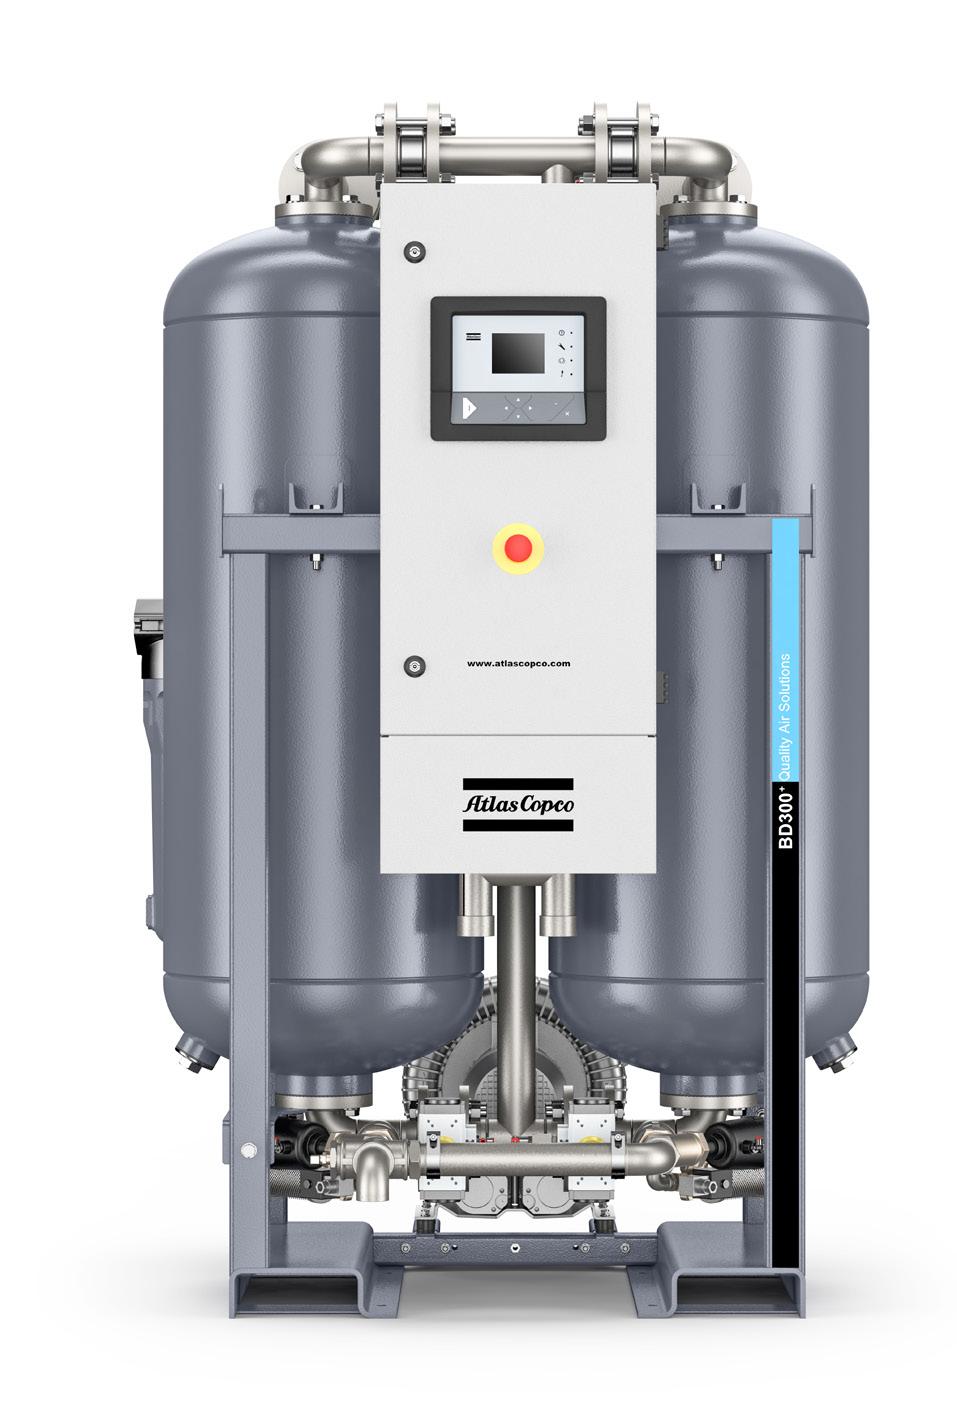 BLOWER PURGE DESICCANT DRYERS 5 FILTERS BD 100 + -300 + Premium performance & cost-efficiency A pre-filter prevents oil contamination to increase desiccant lifetime.